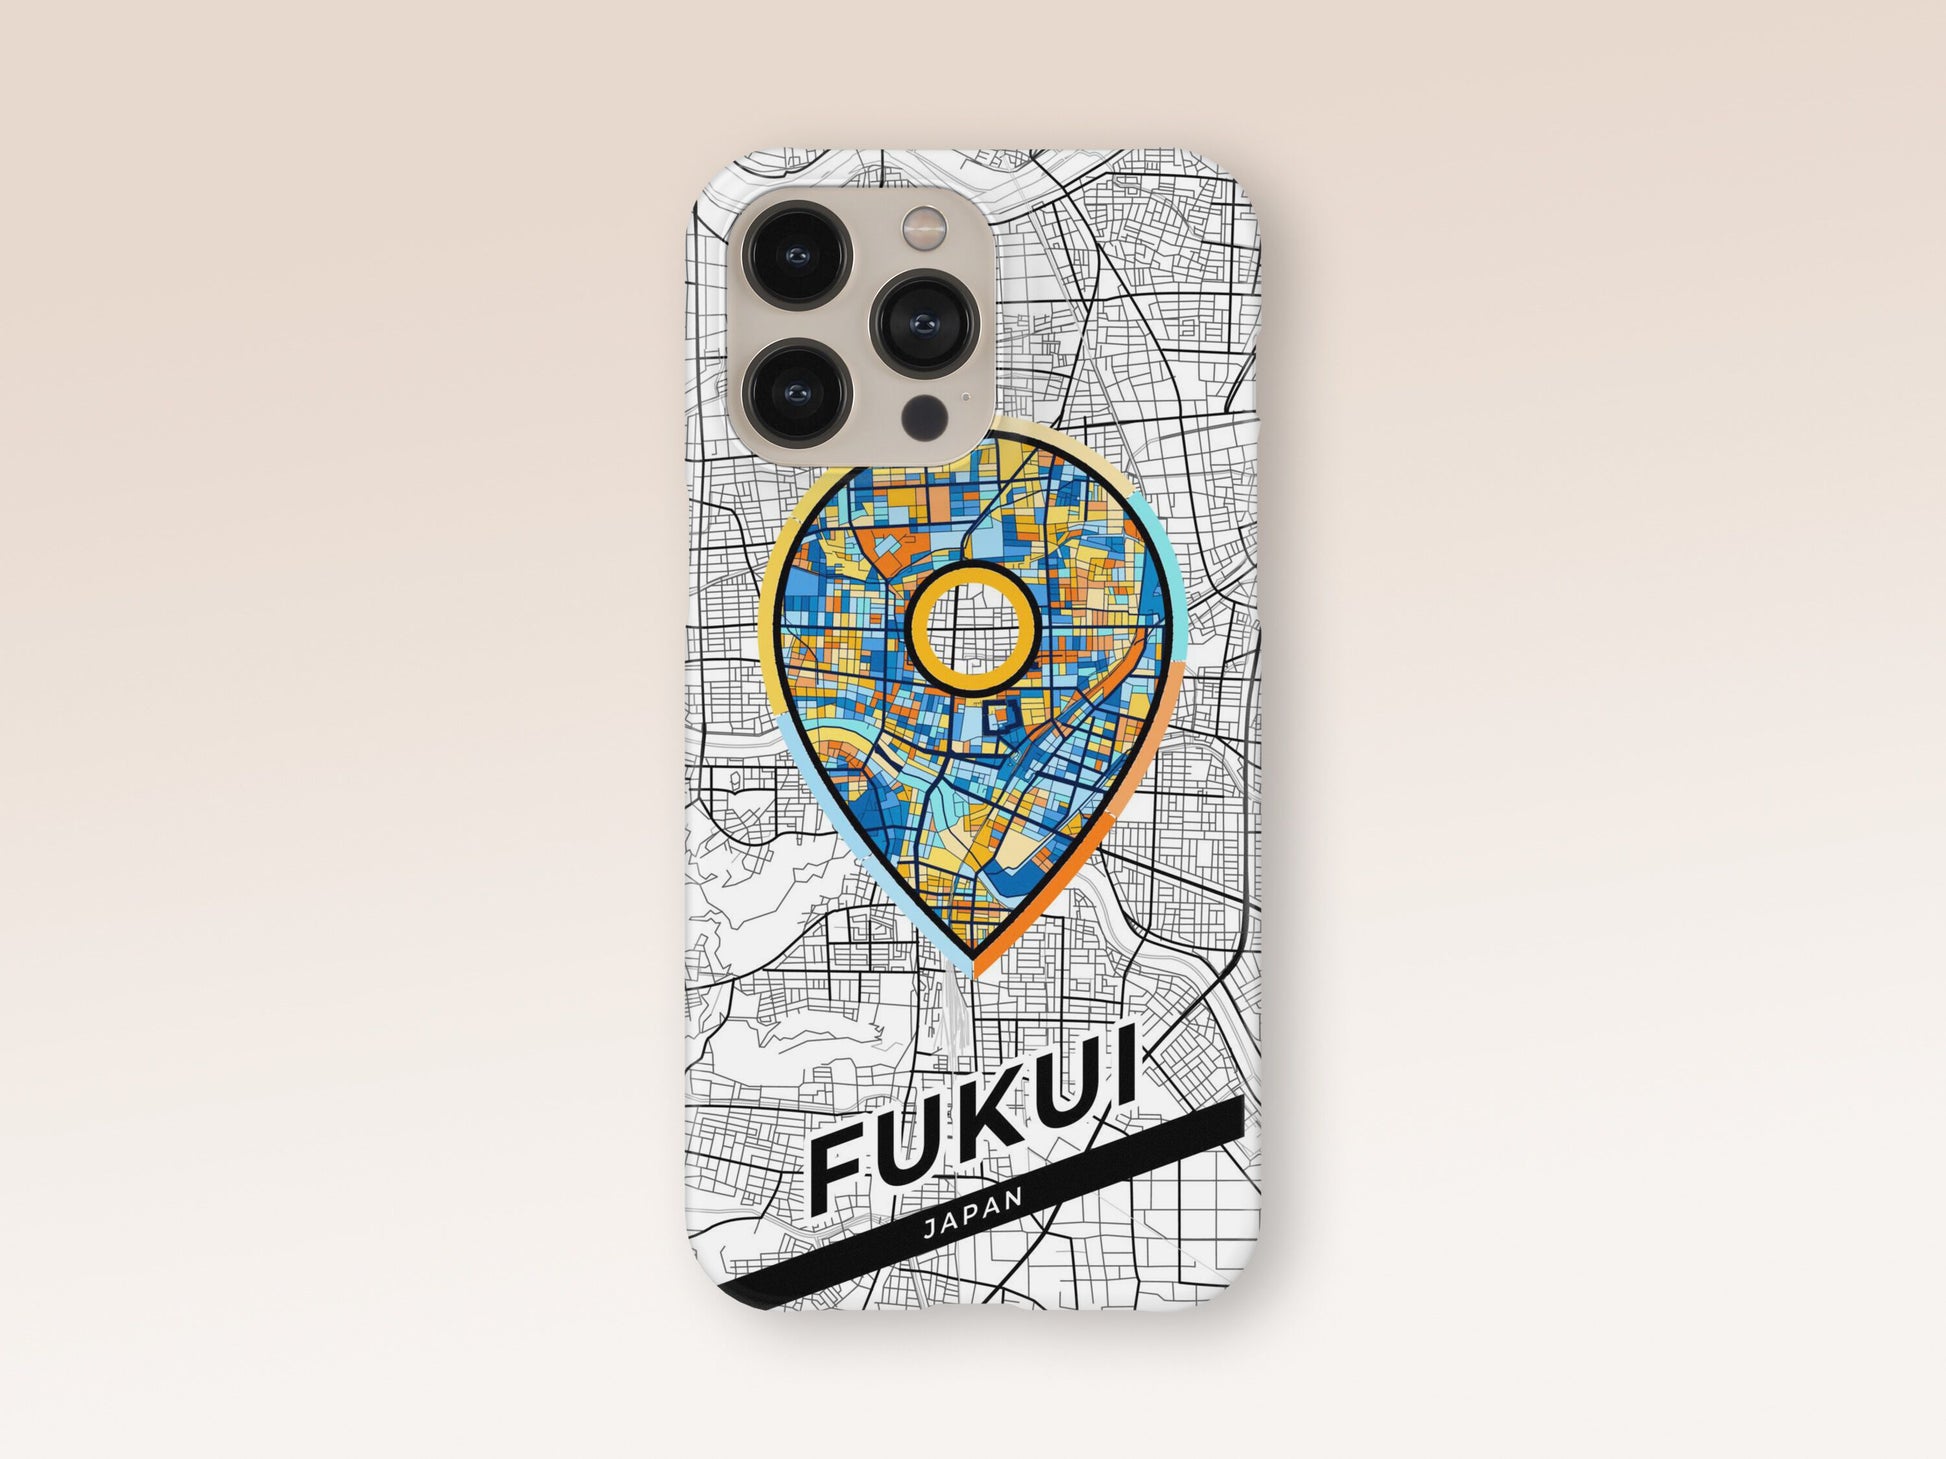 Fukui Japan slim phone case with colorful icon. Birthday, wedding or housewarming gift. Couple match cases. 1